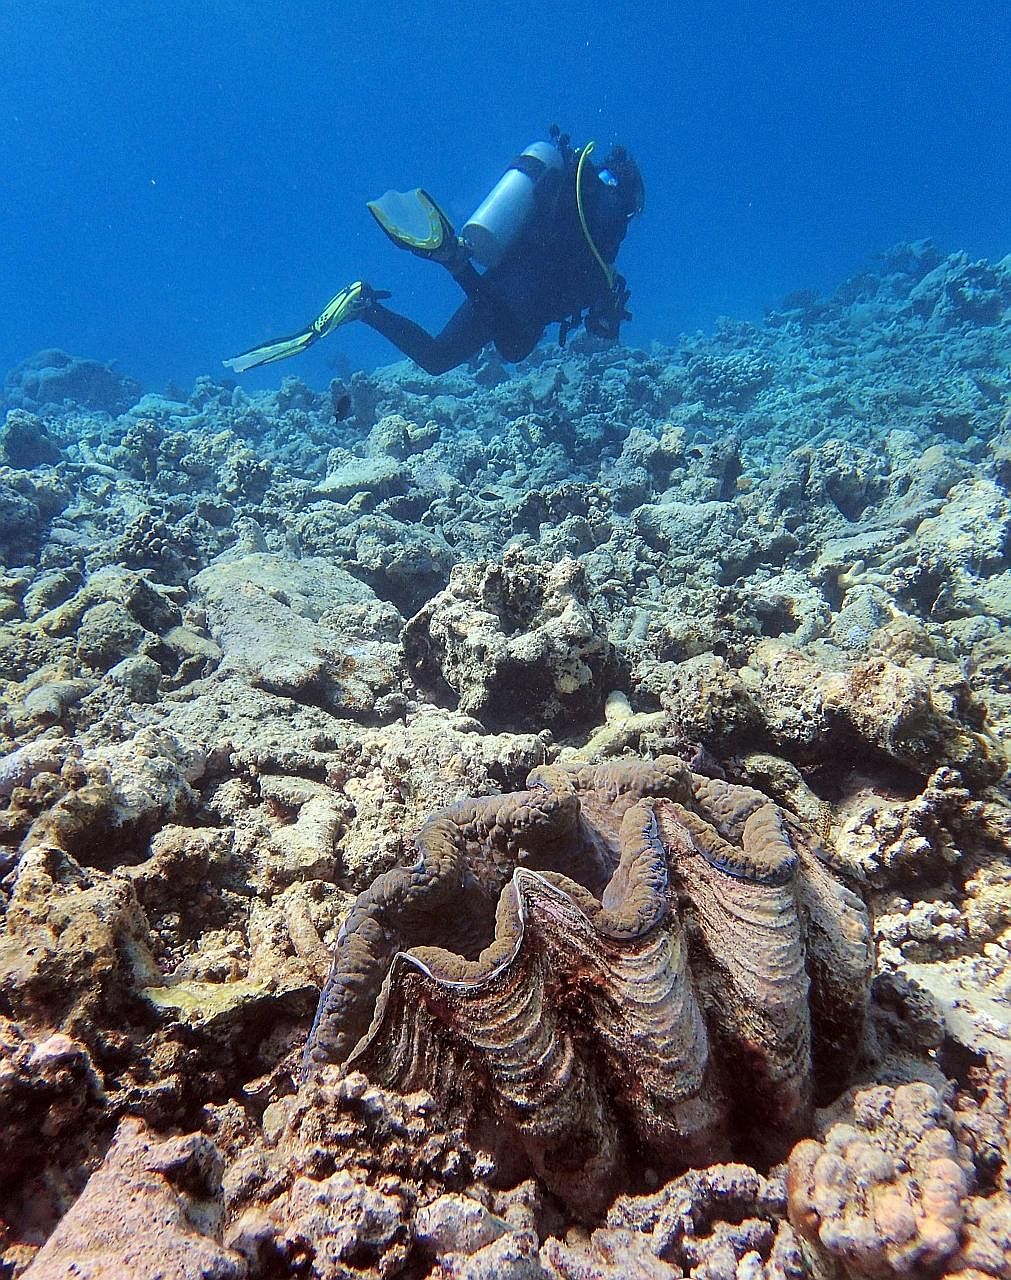 A giant clam on a severely bleached coral reef near Lizard Island on the Great Barrier Reef, Australia.